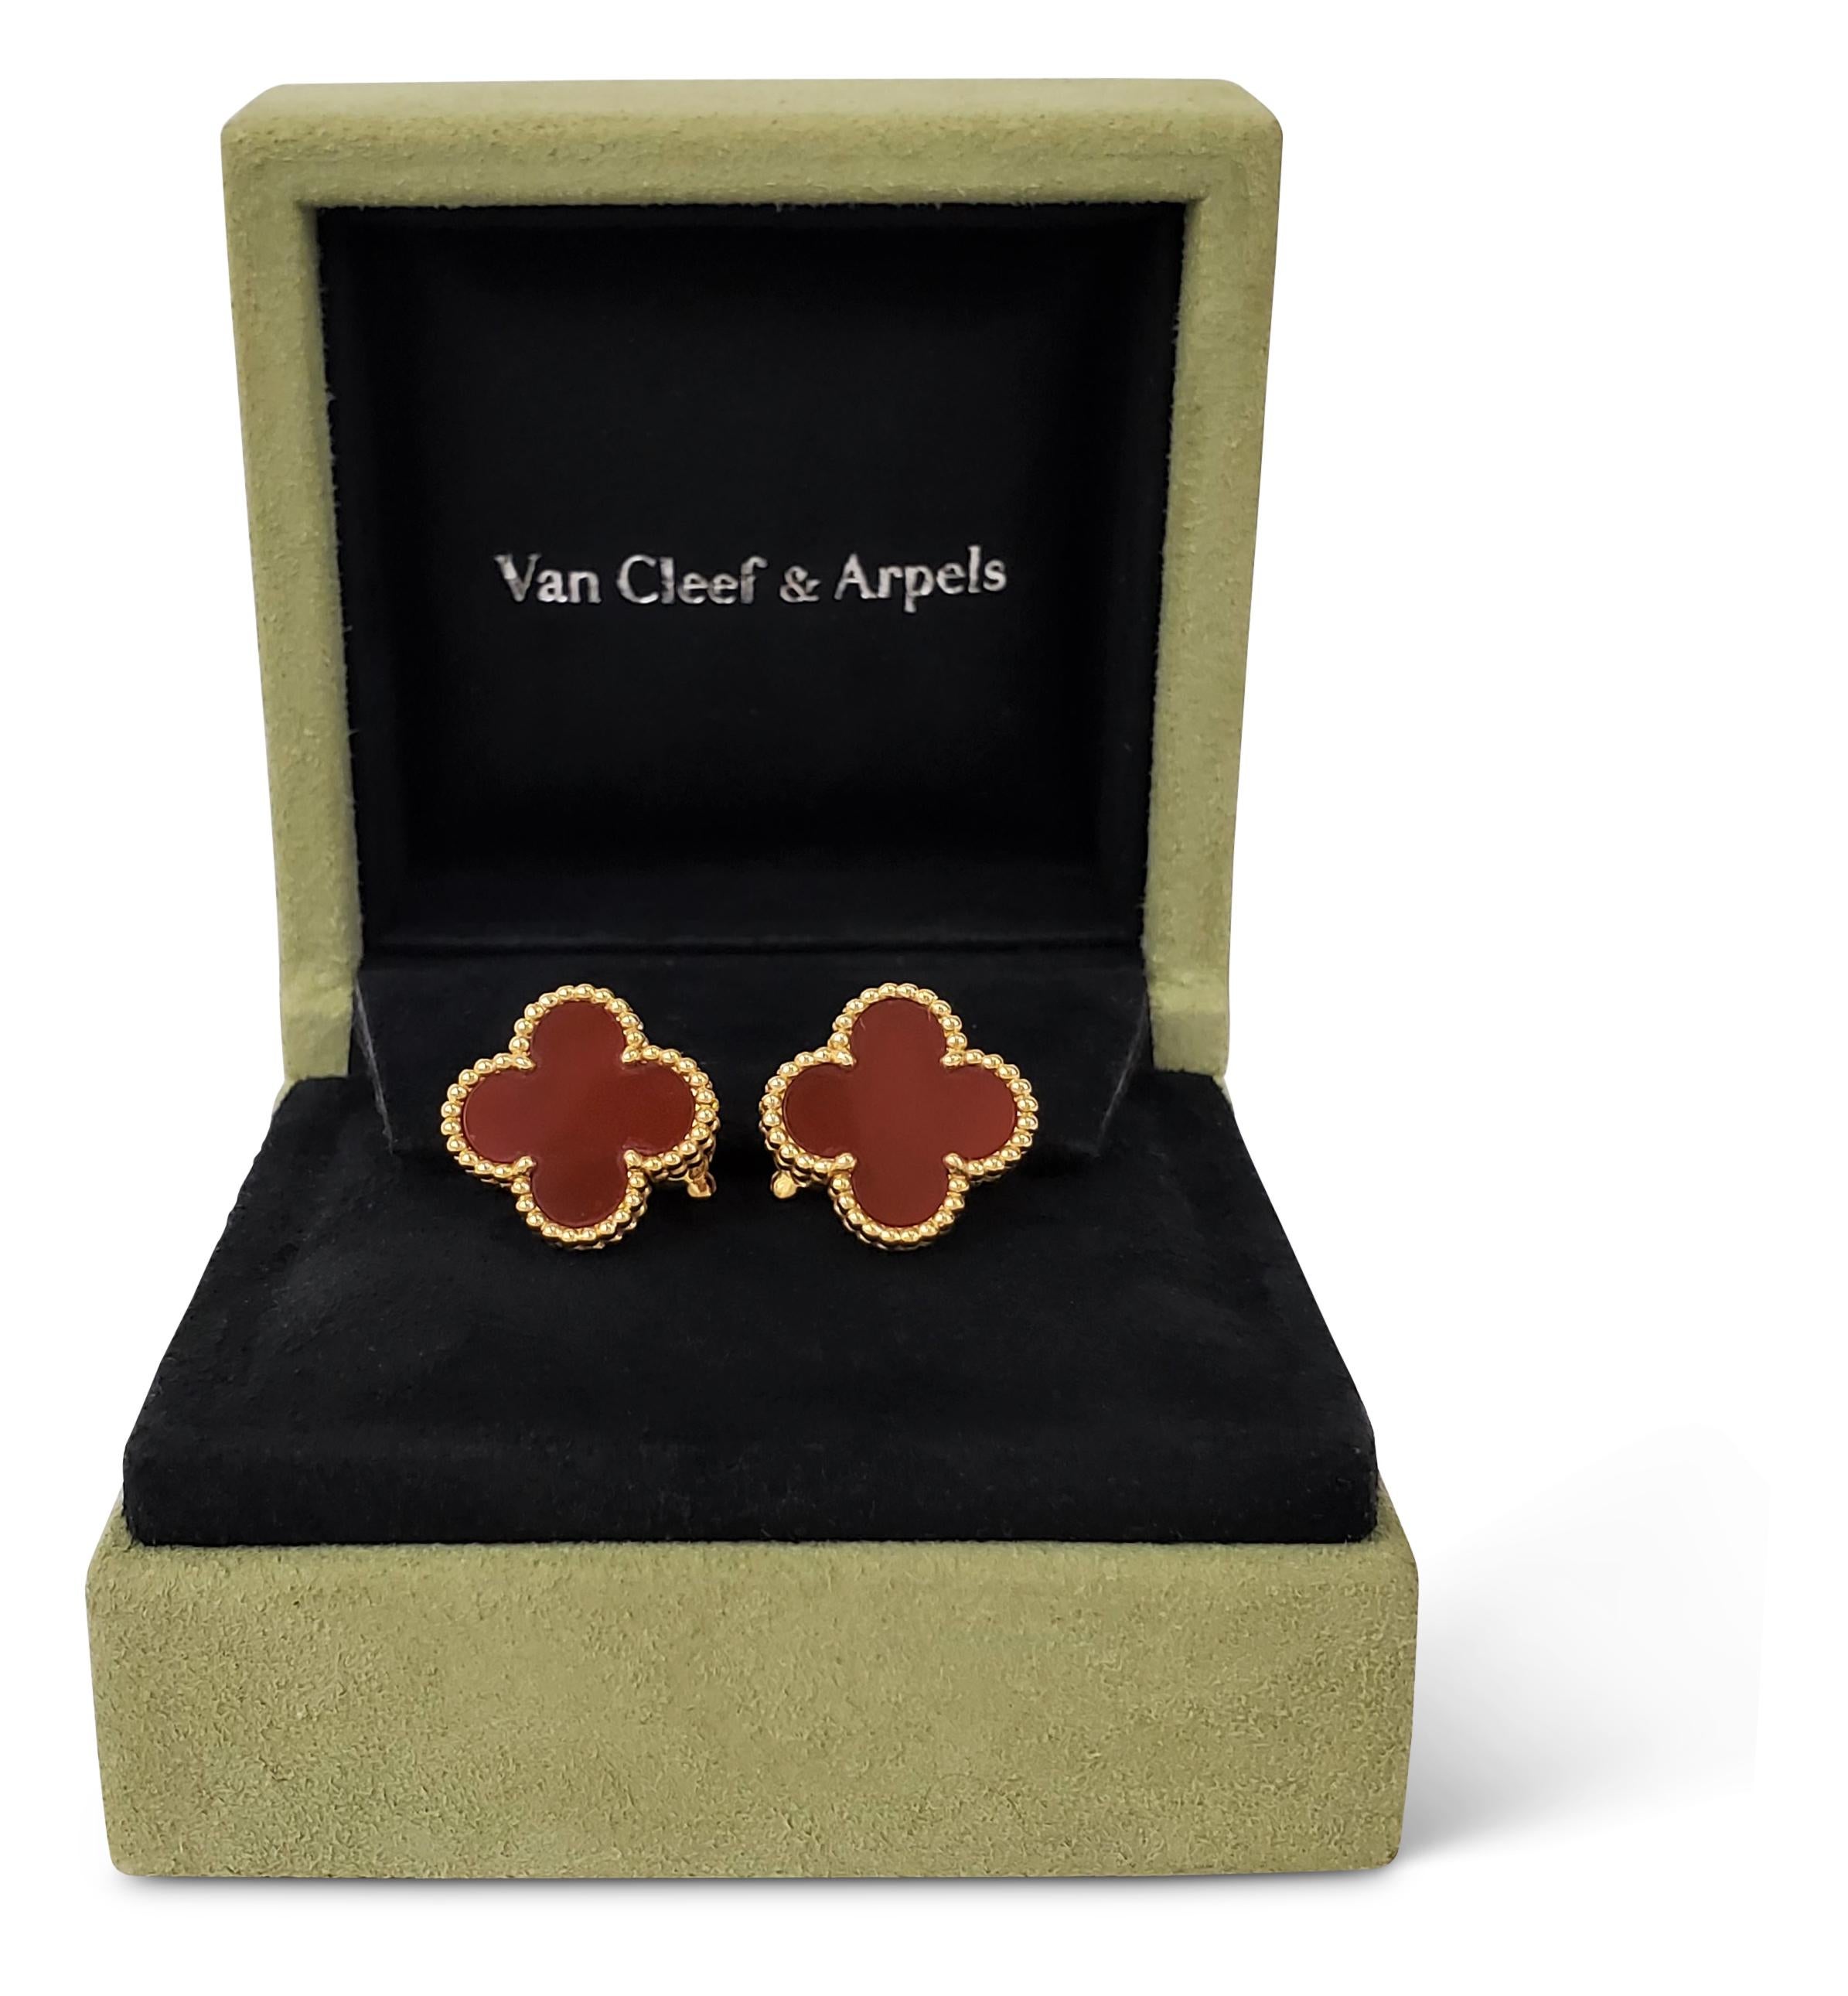 Authentic Van Cleef & Arpels Vintage Alhambra earrings inspired by the clover and crafted in 18 karat yellow gold set with carved carnelian stones. Signed VCA, Au750, with serial number. The earrings measure 15mm in diameter. Presented with original